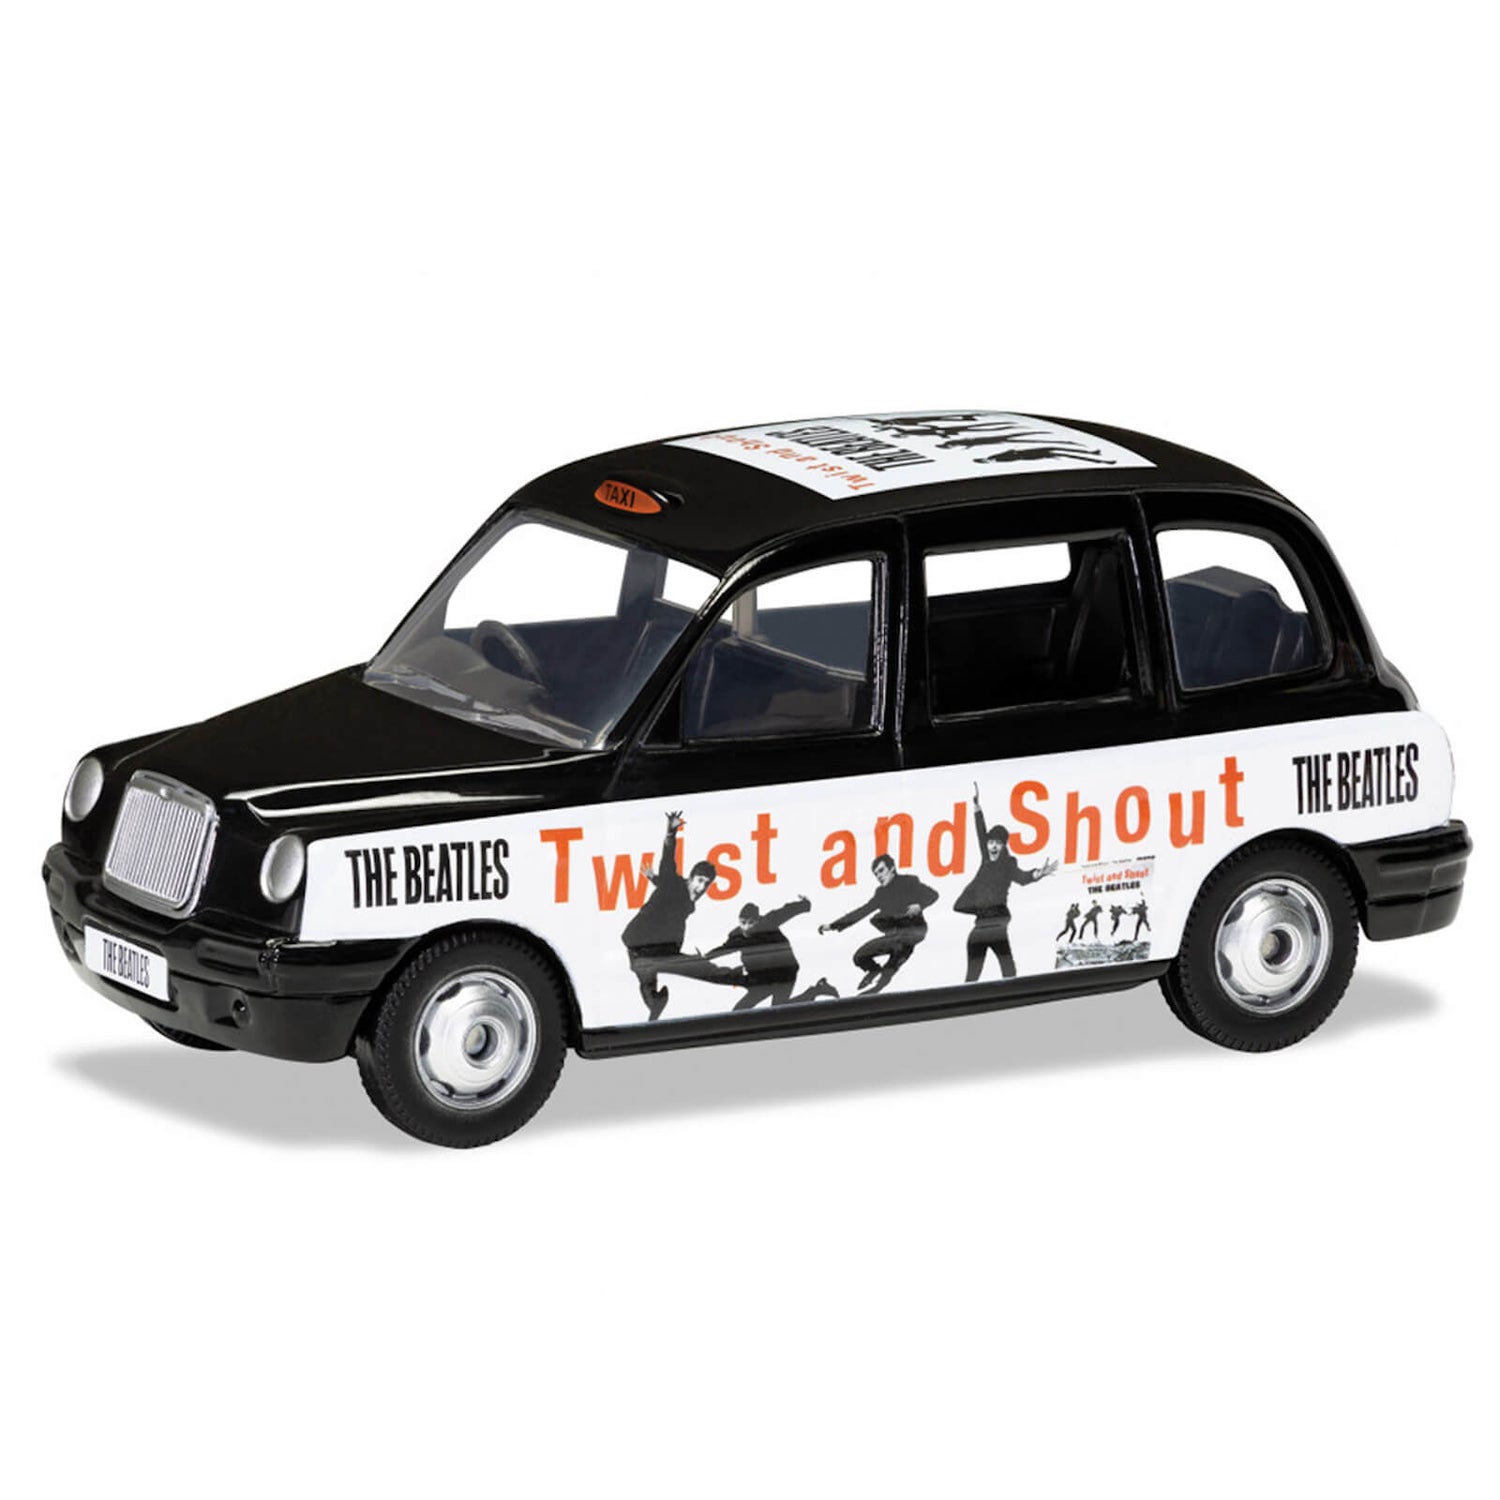 The Beatles London Taxi Twist and Shout Model Set - Scale 1:36